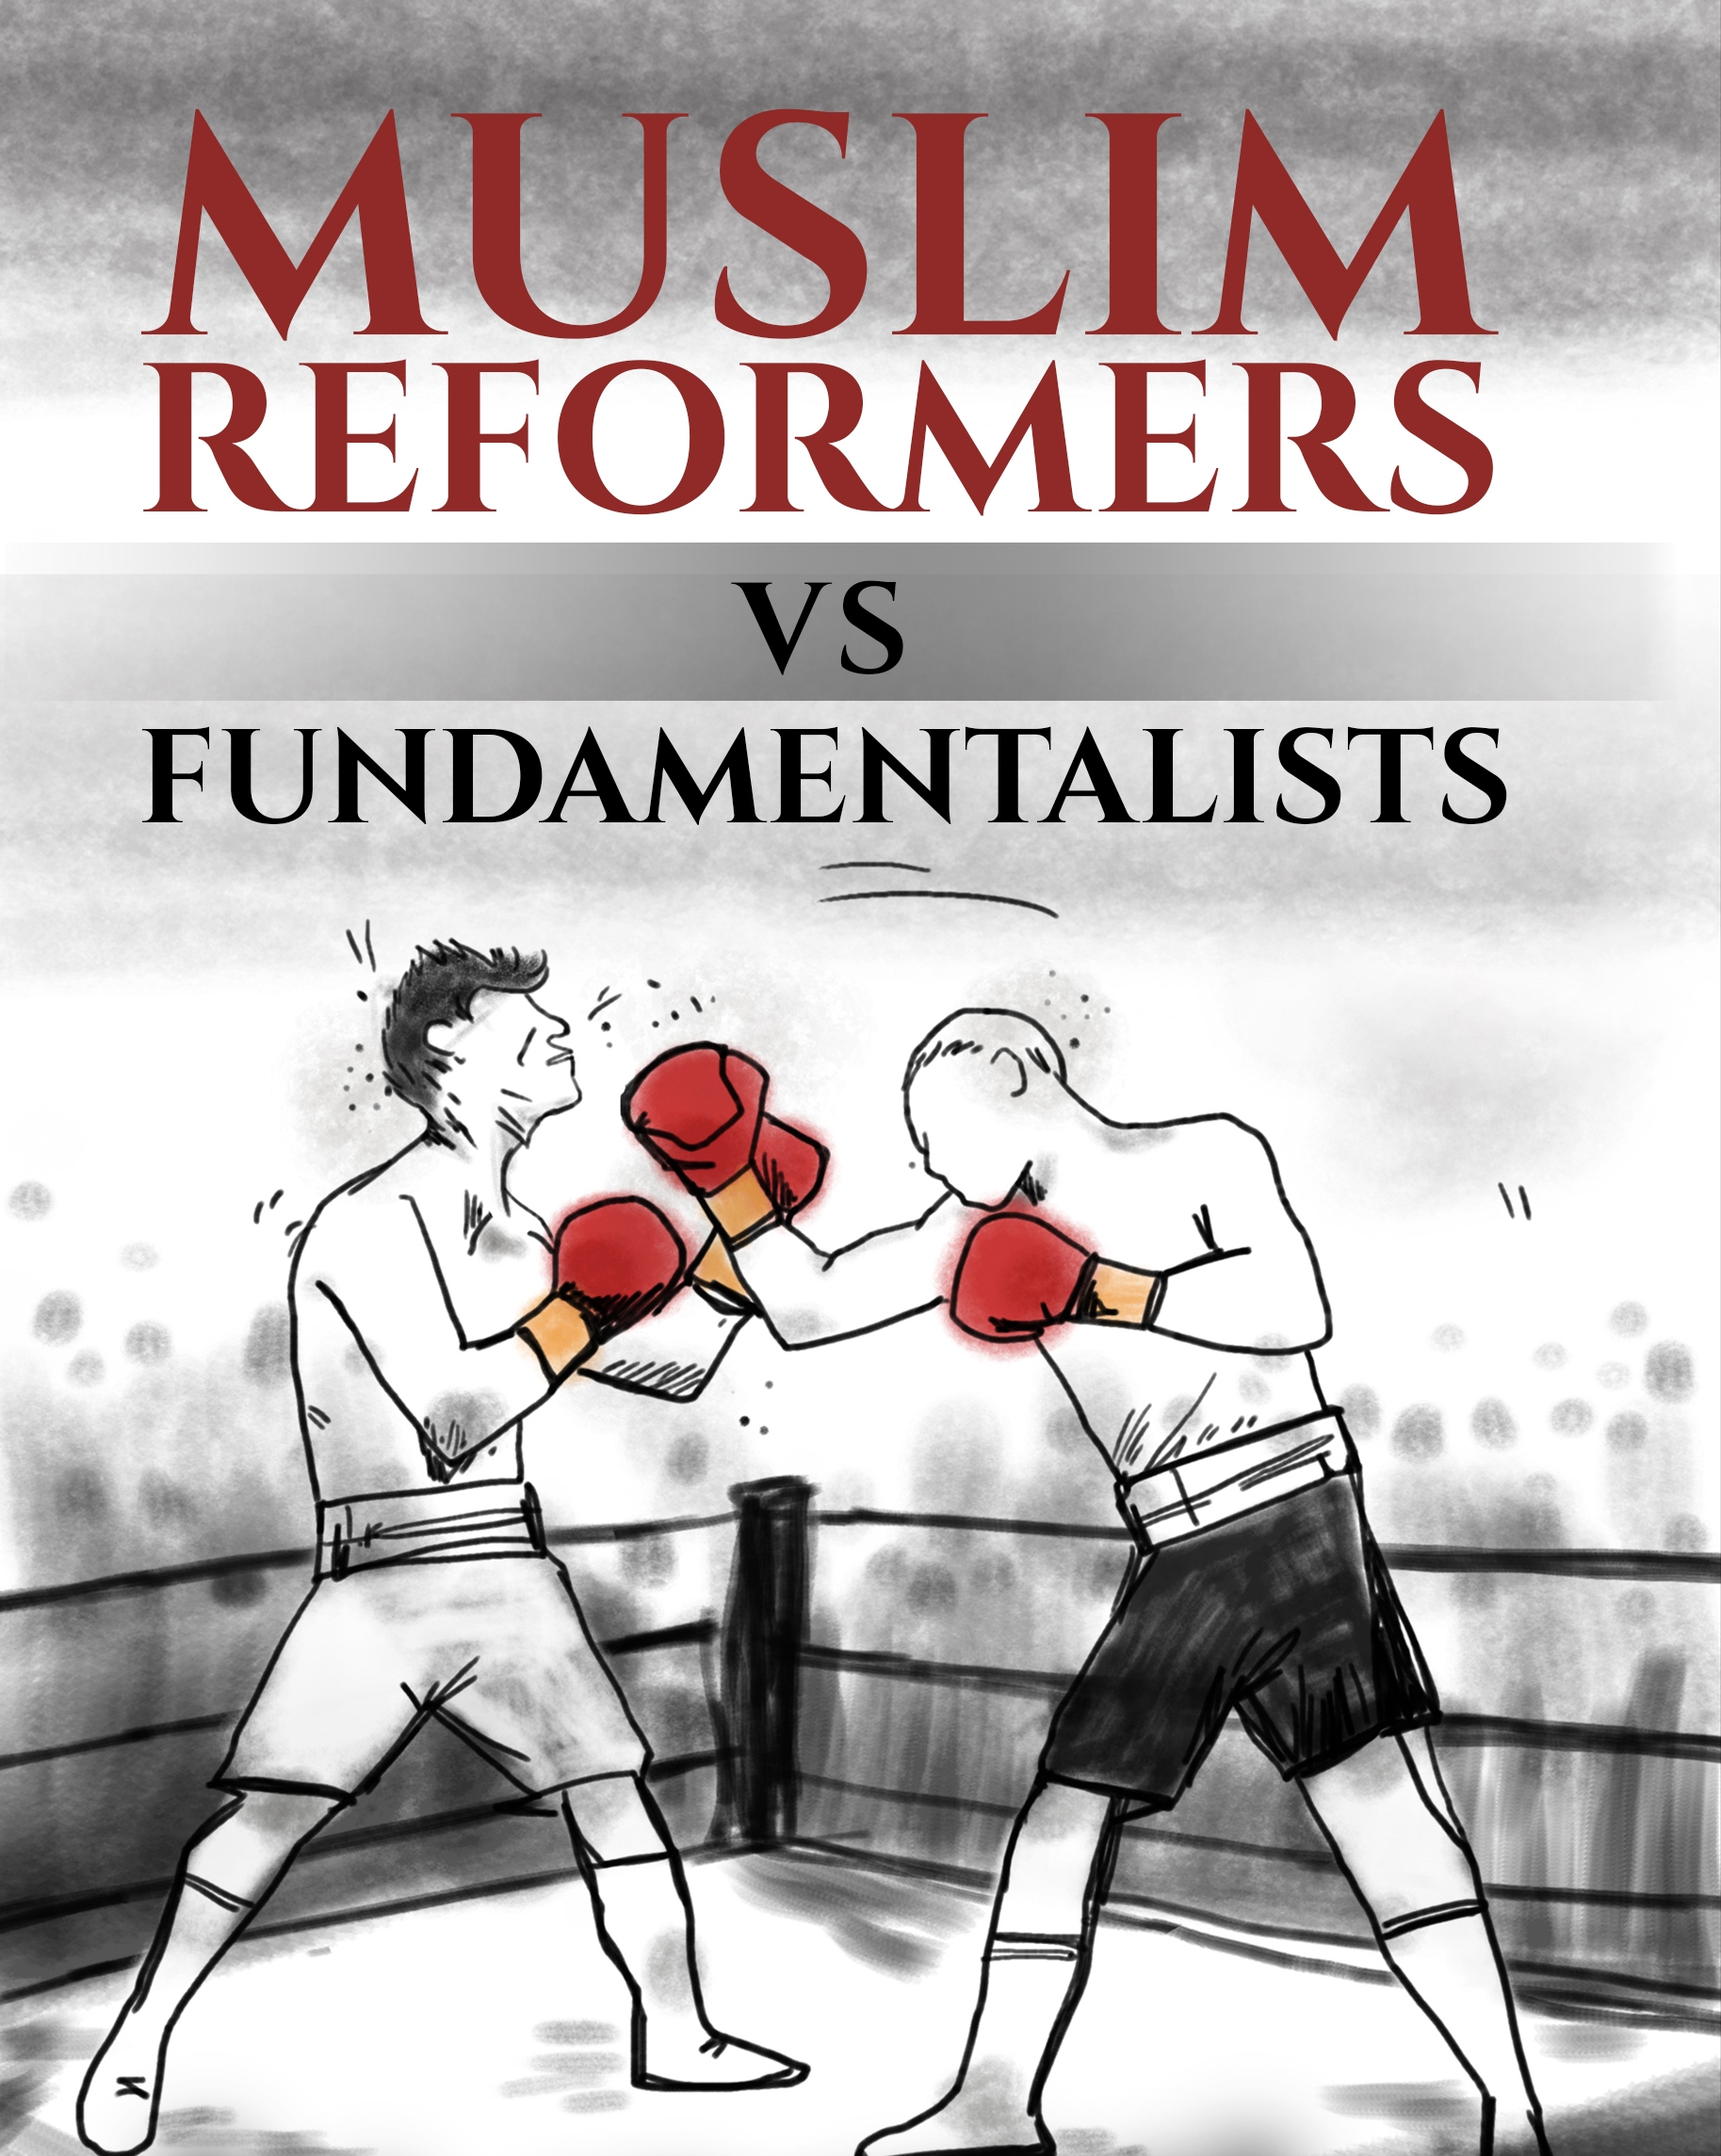 Muslim Reformers vs. Fundamentalists: Who Will Win this Fight?